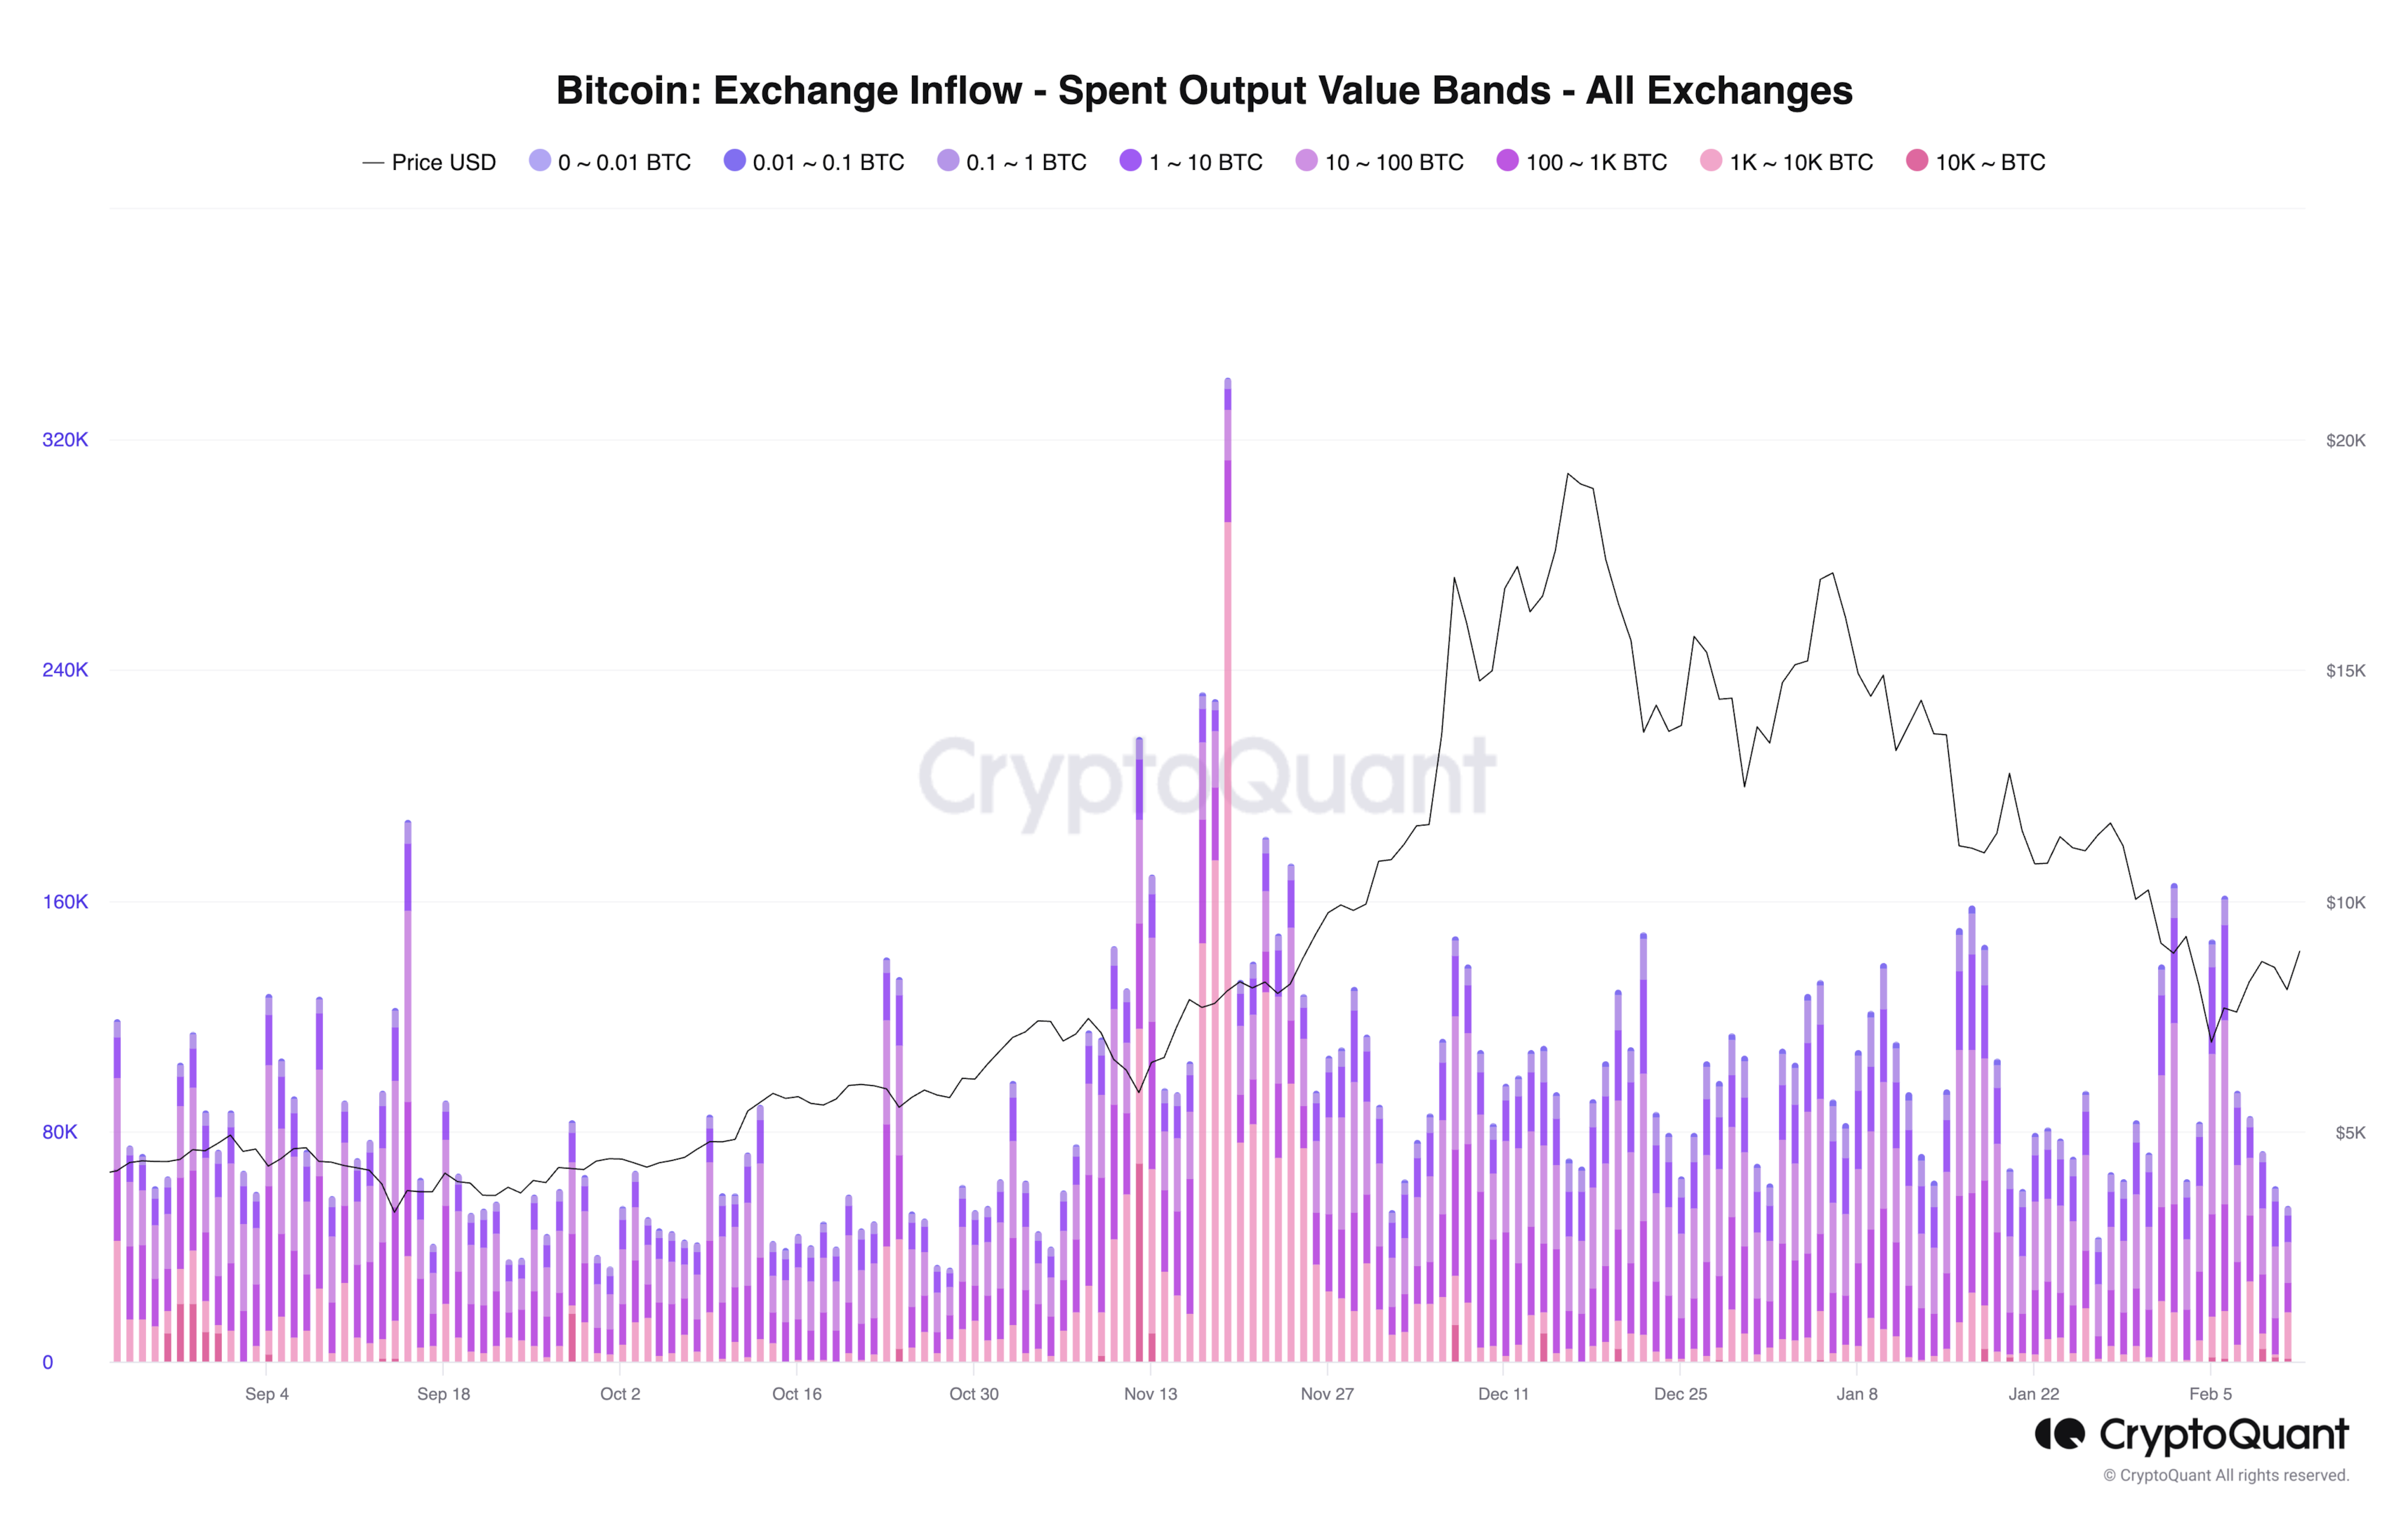 Bitcoin: Exchange Inflow - Spent Output Value Bands - All Exchanges. CryptoQuant